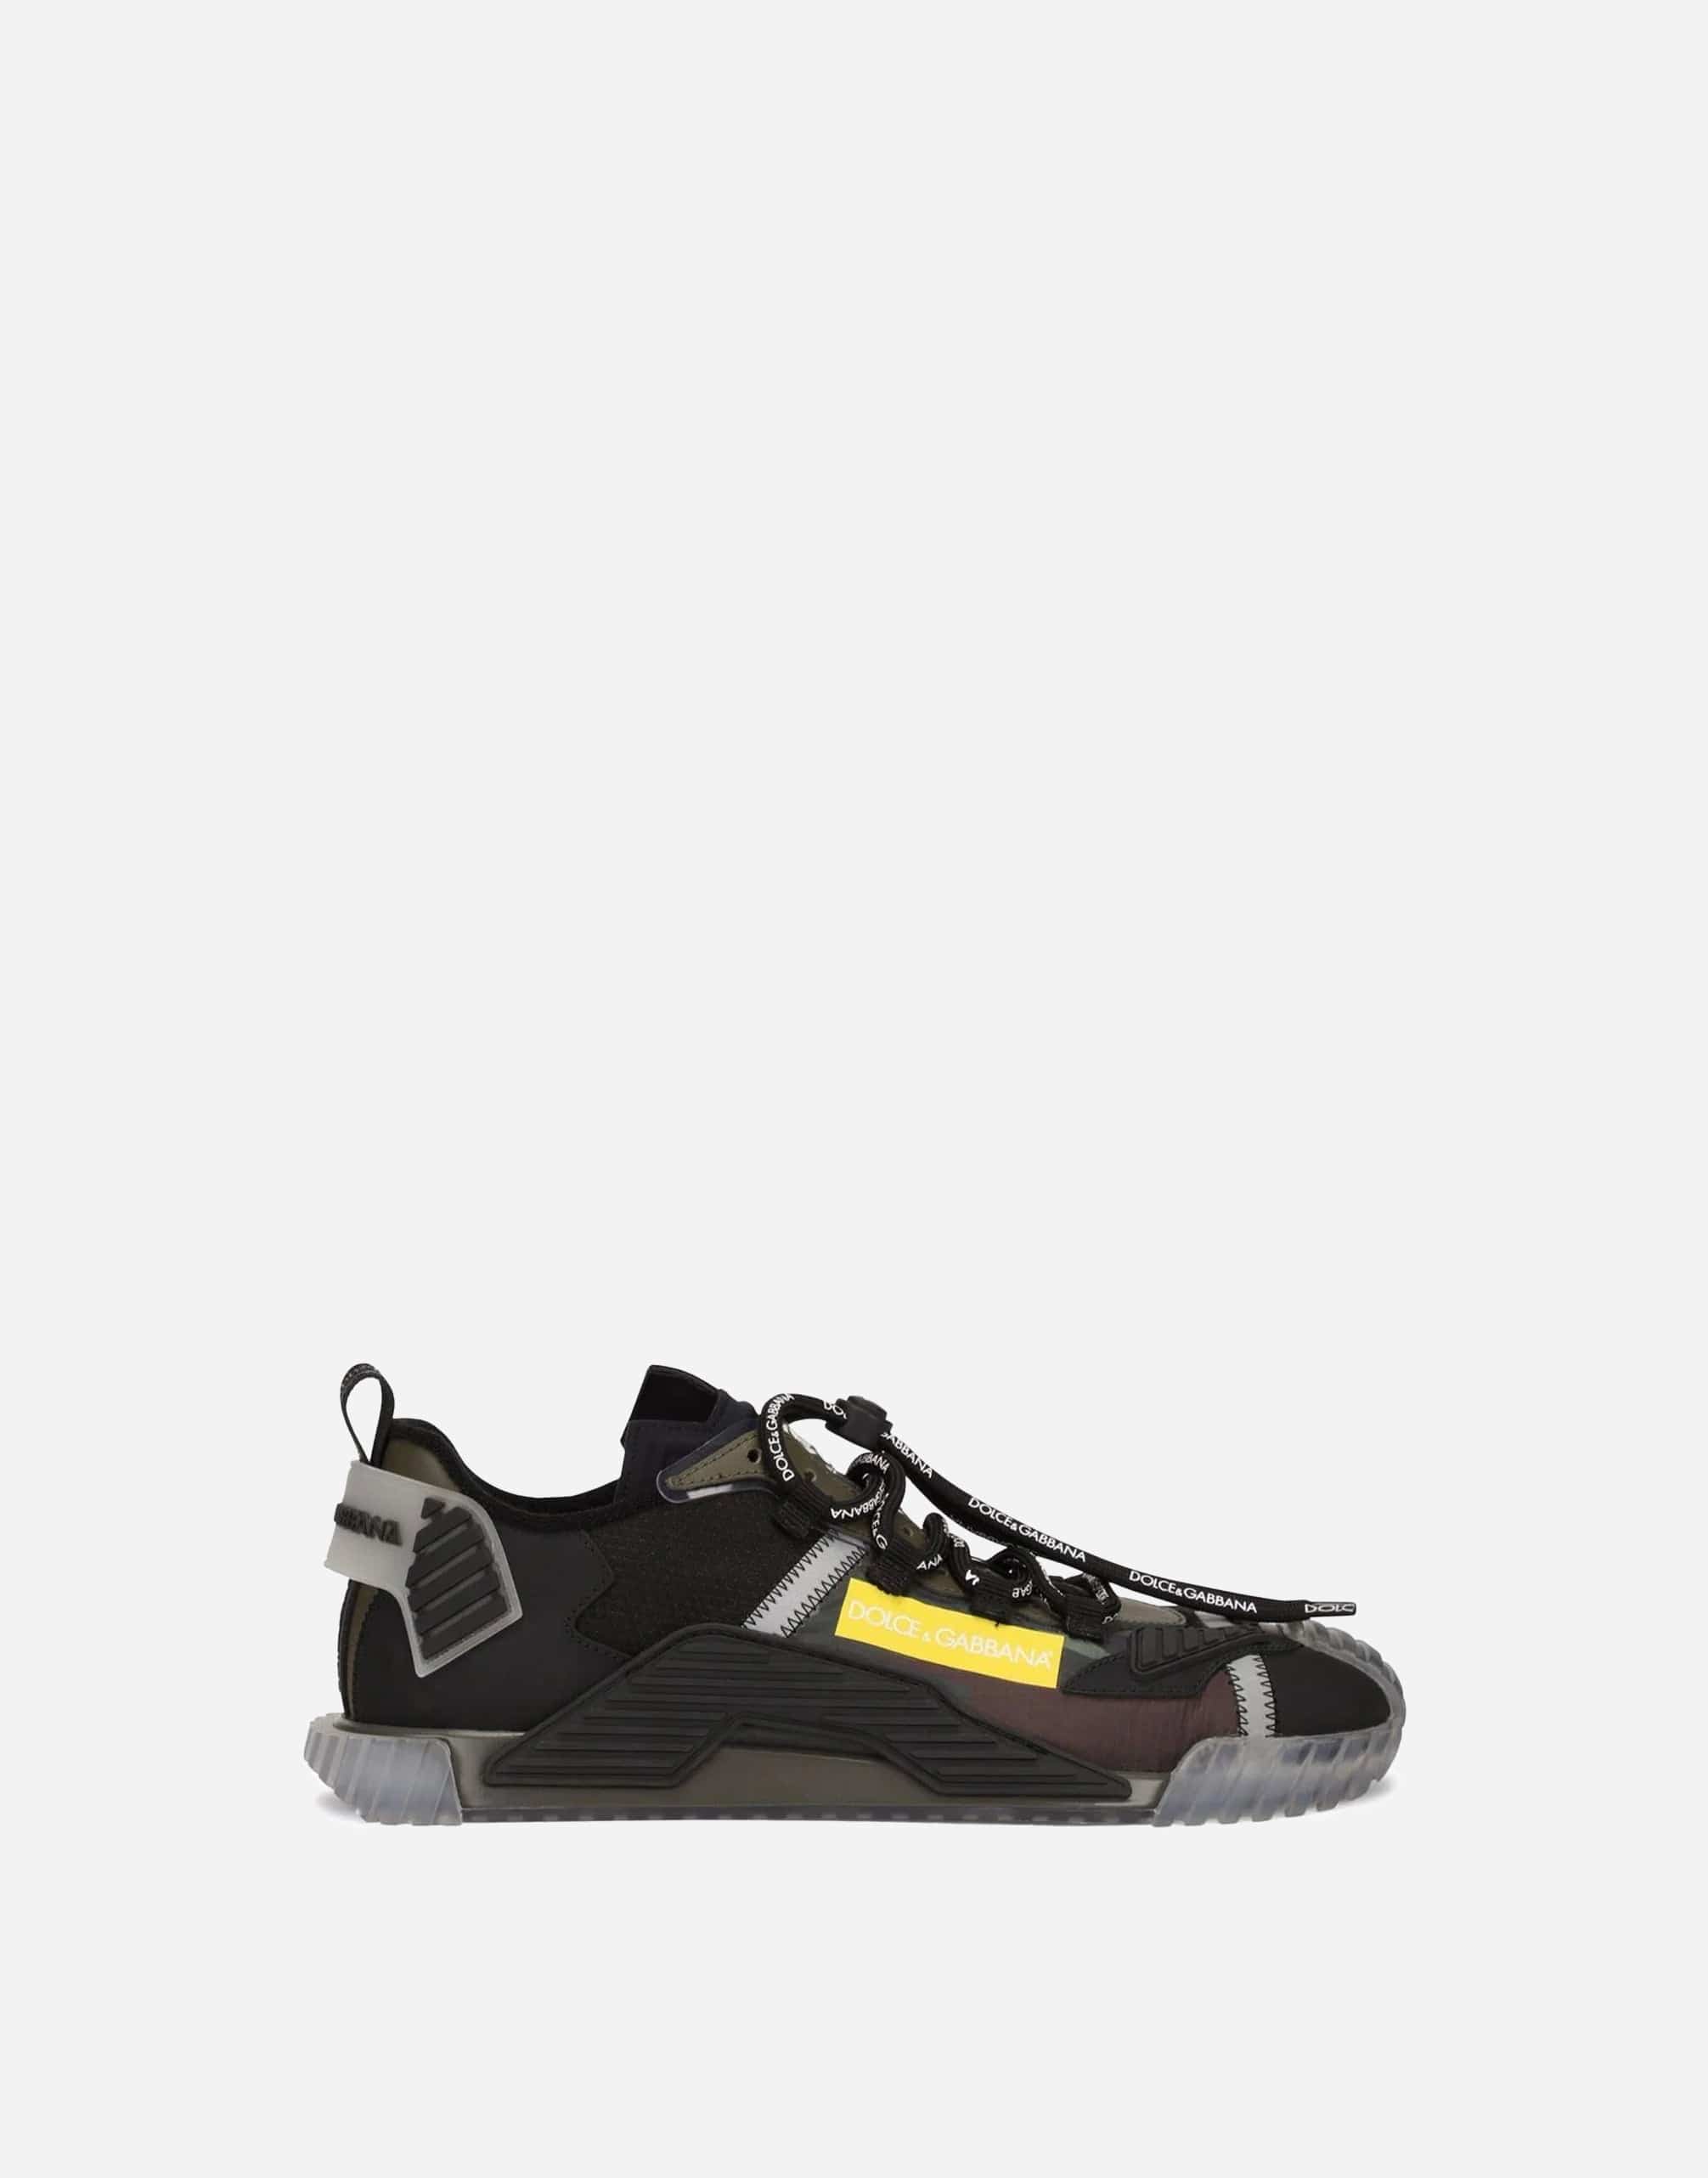 Dolce & Gabbana NS1 Panelled Low-Top Sneakers